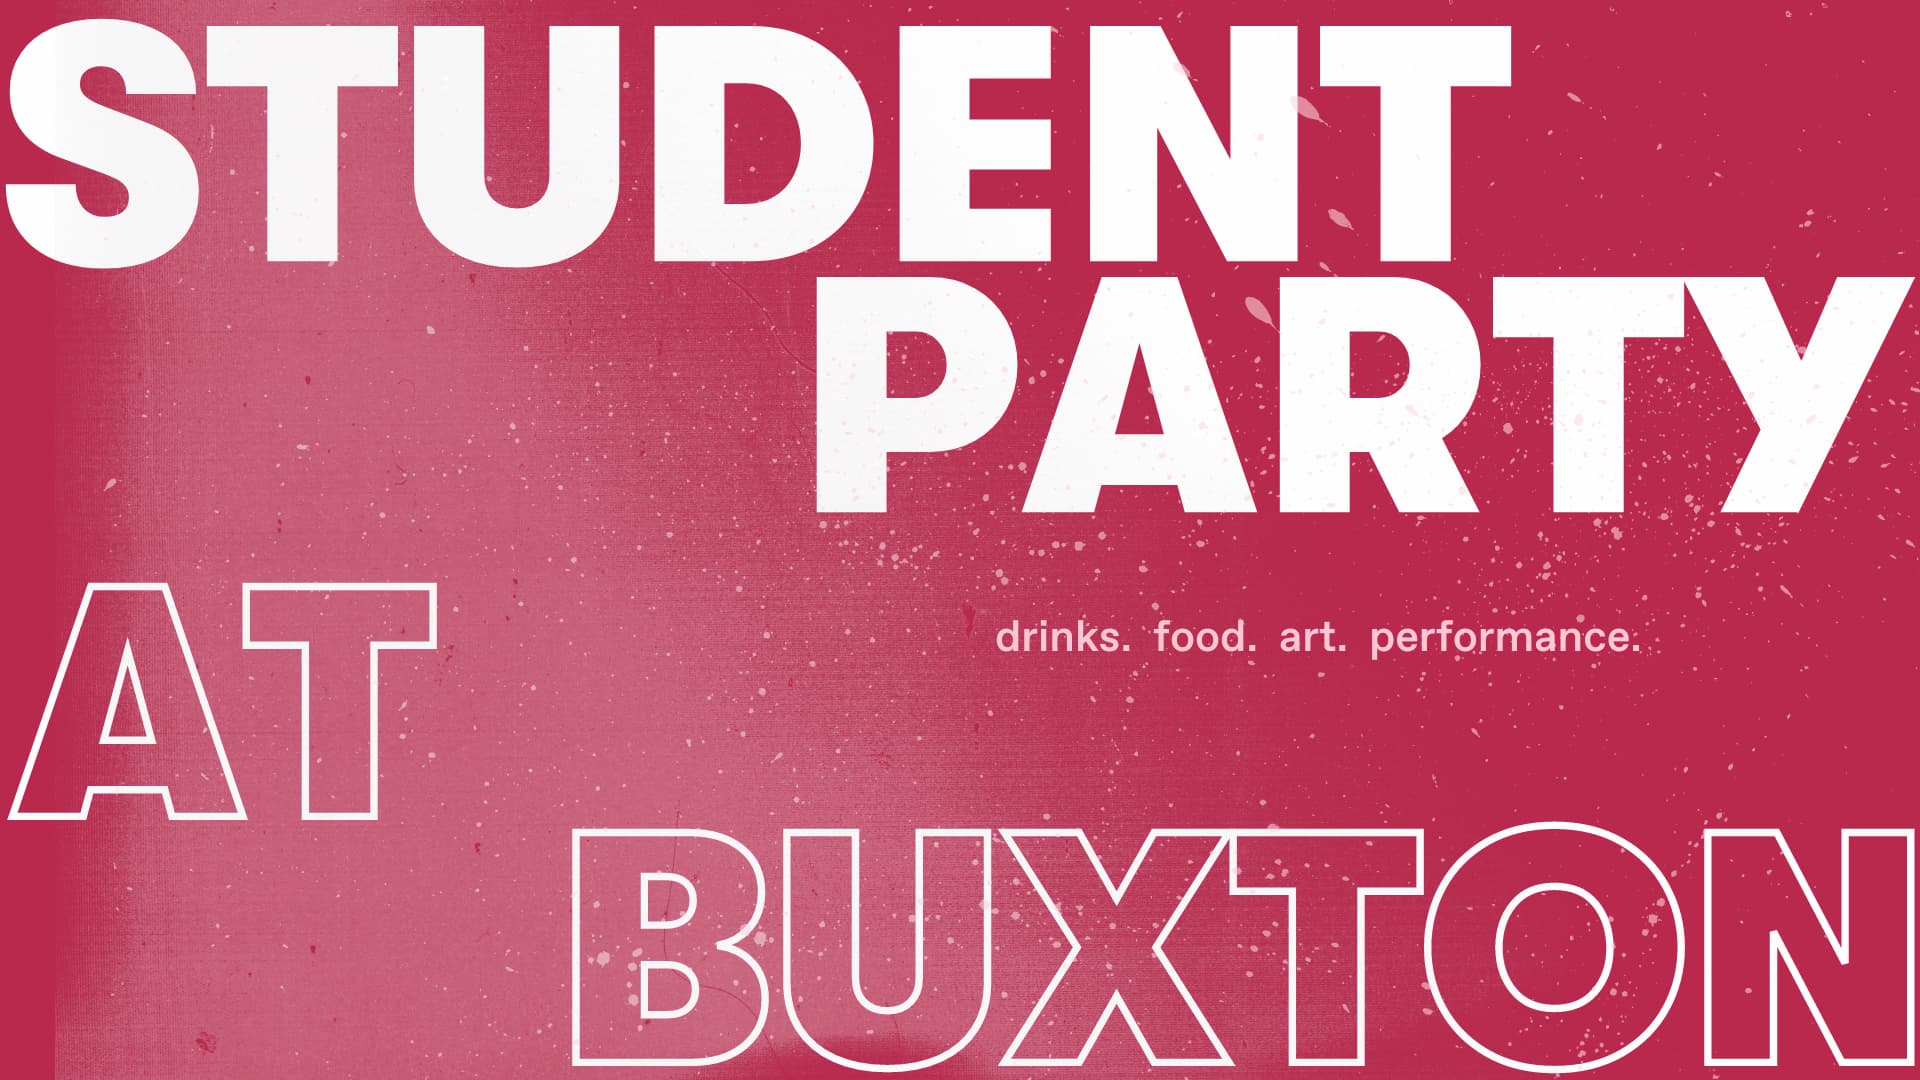 A text poster for a student party at Buxton Gallery in bold red